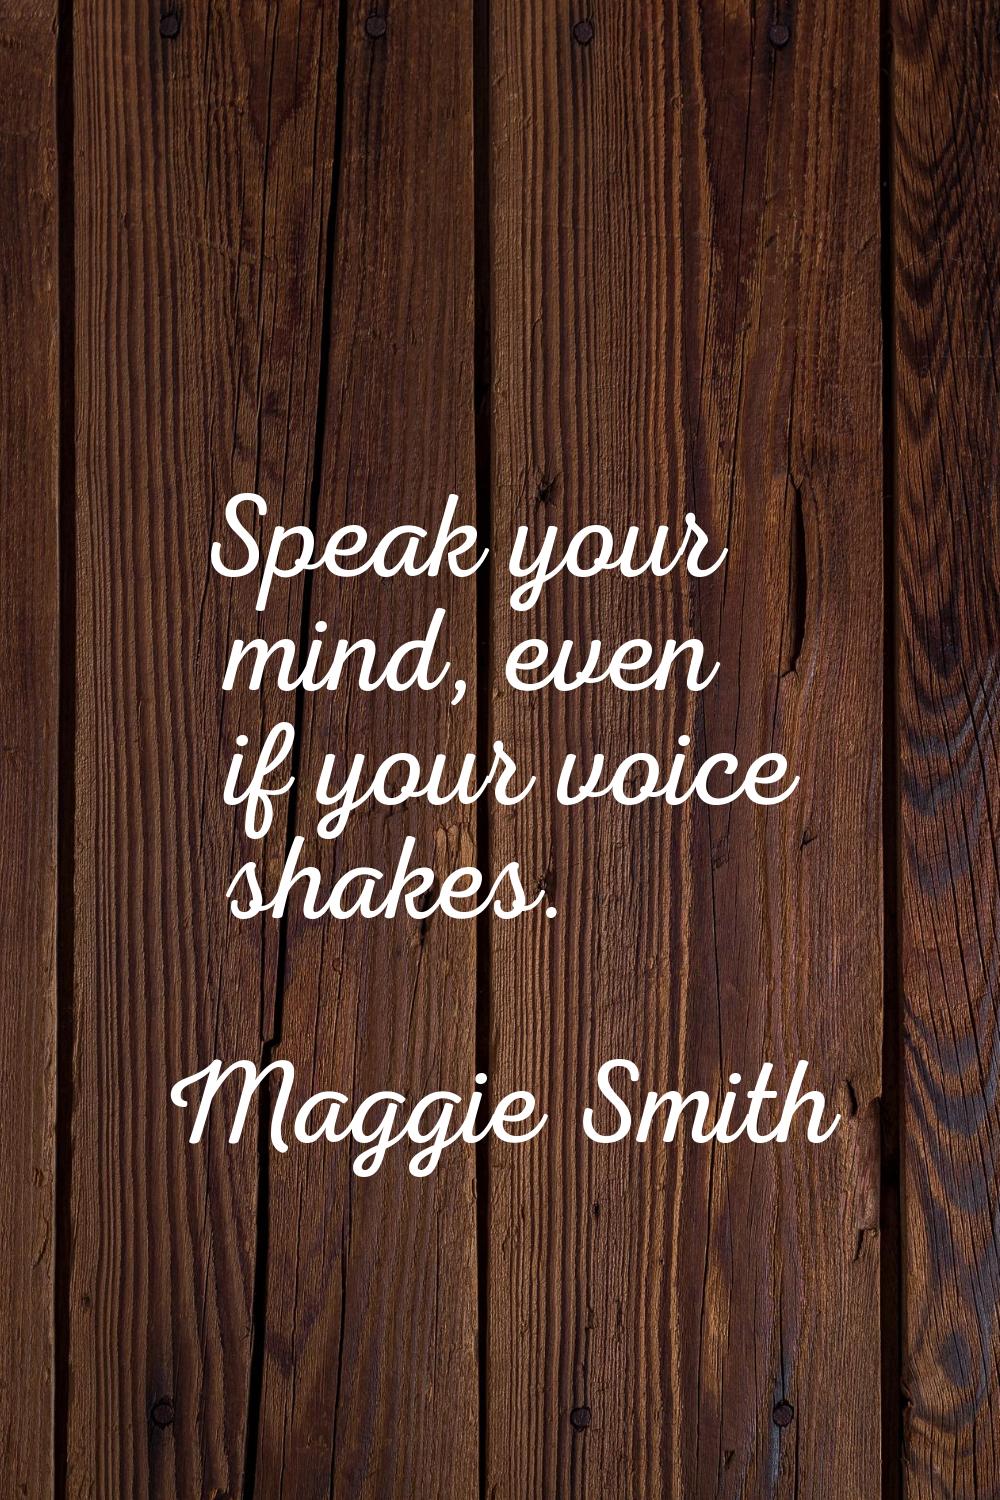 Speak your mind, even if your voice shakes.